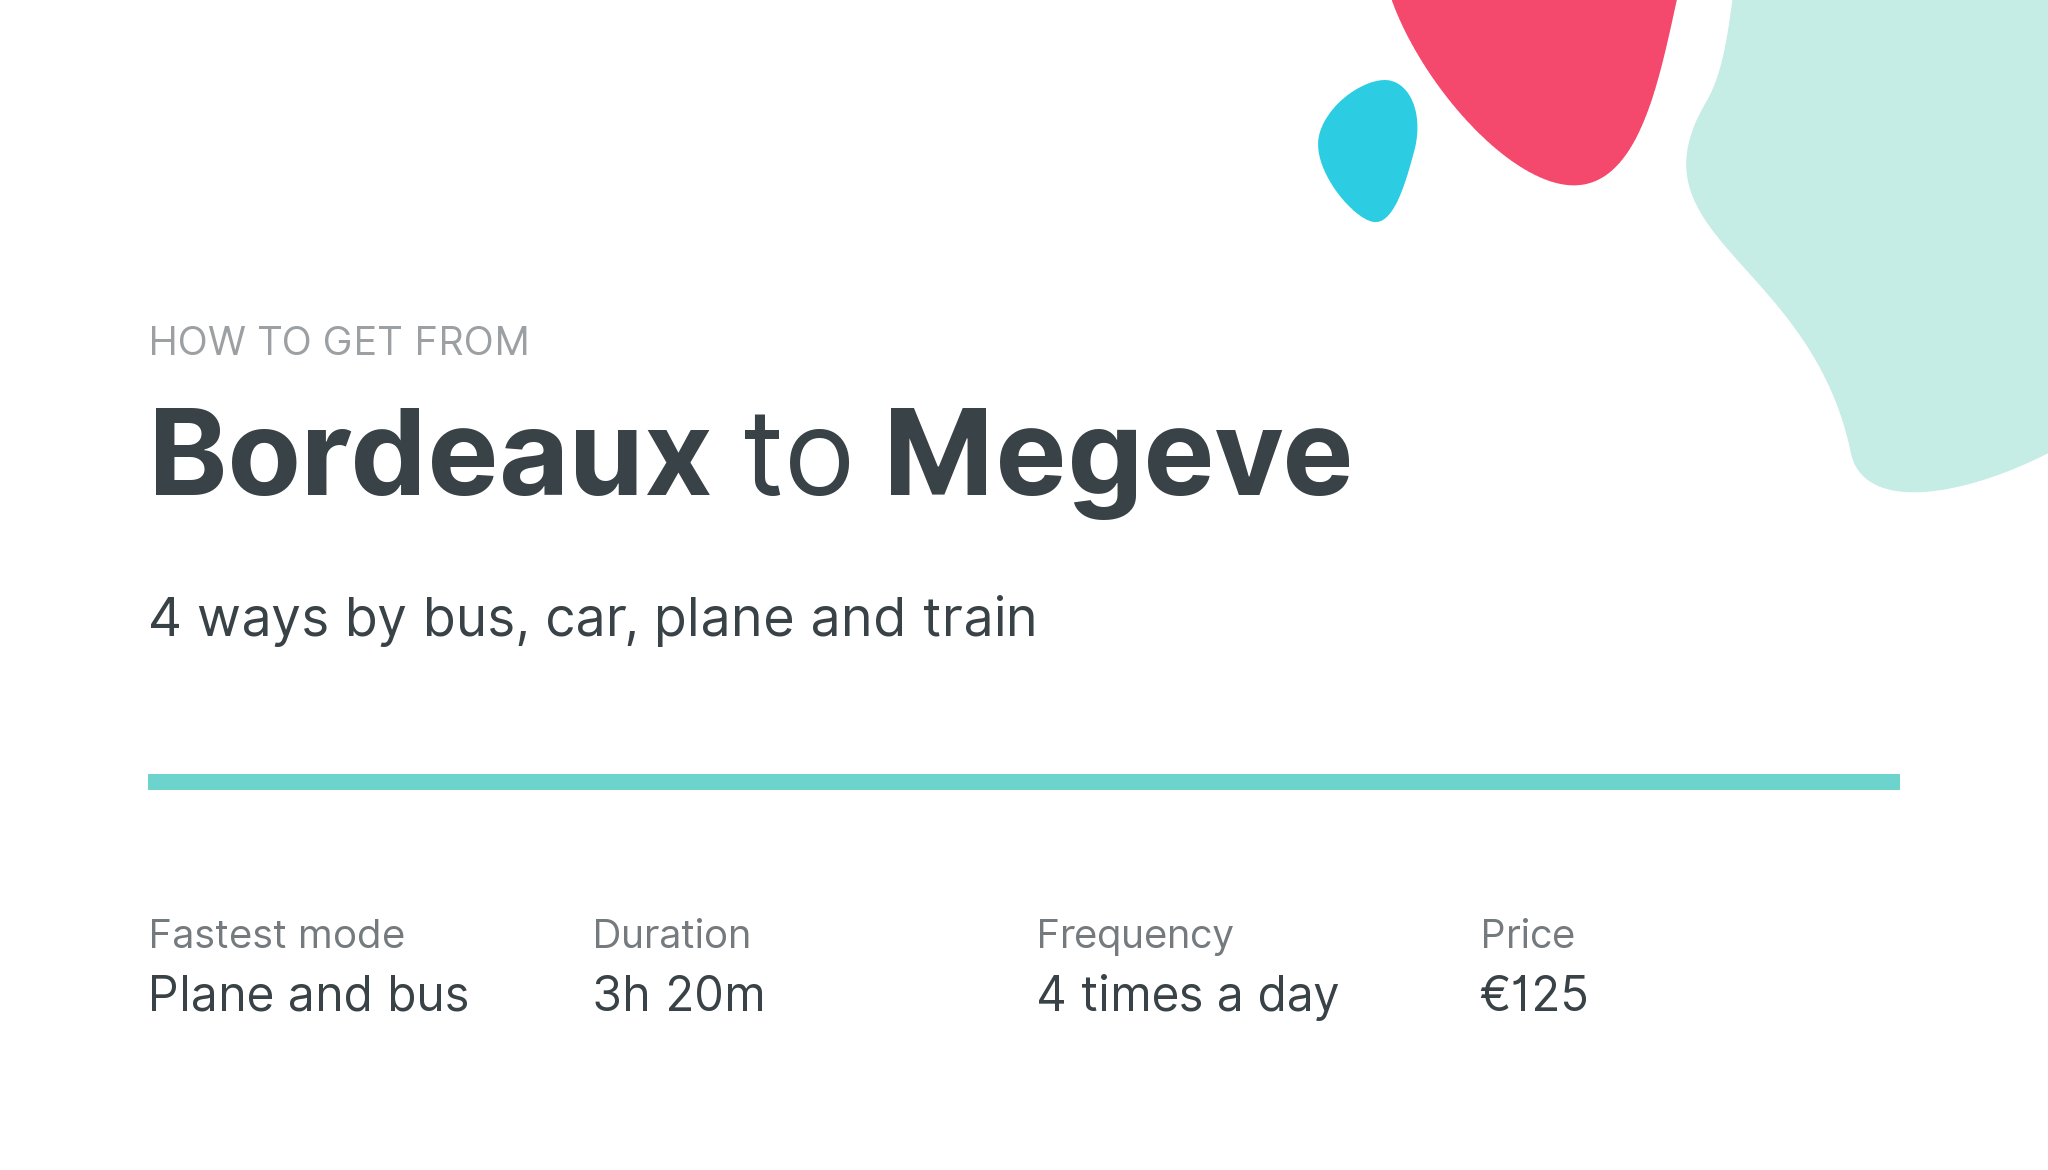 How do I get from Bordeaux to Megeve